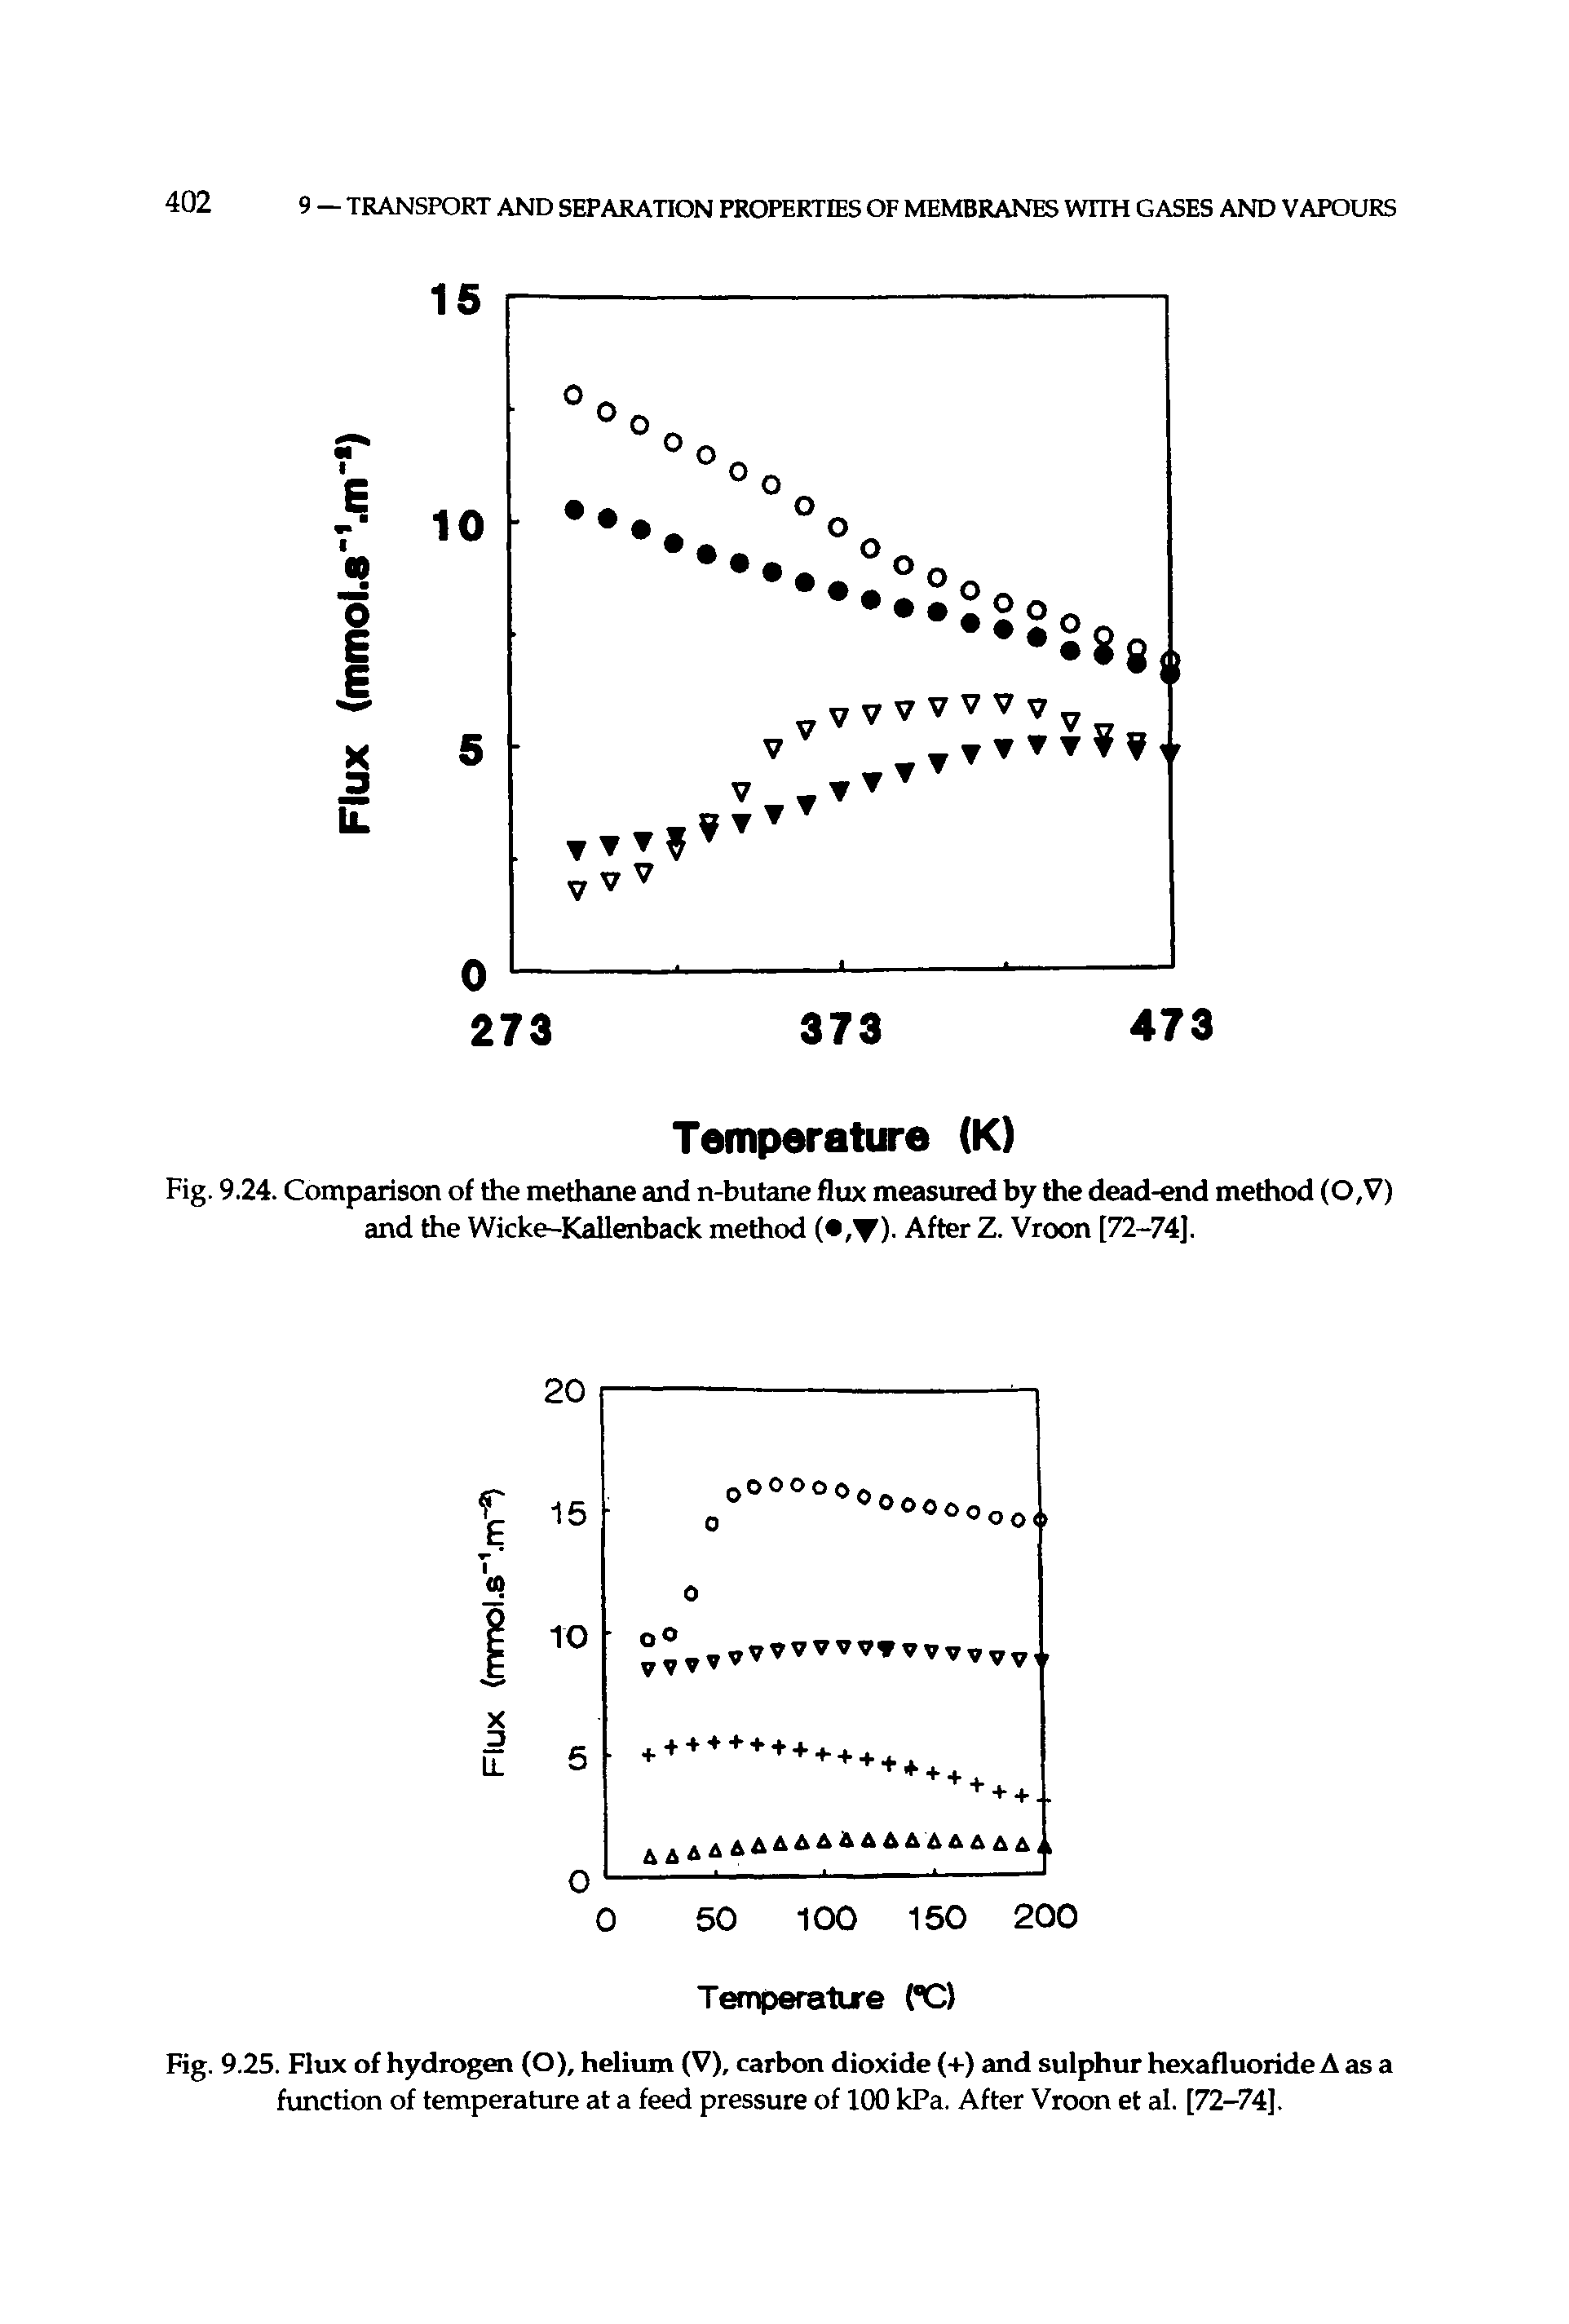 Fig. 9.25. Flux of hydrogen (O), helium (V), carbon dioxide (+) and sulphur hexafluoride A as a function of temperature at a feed pressure of 100 kPa. After Vroon et al. [72-74].